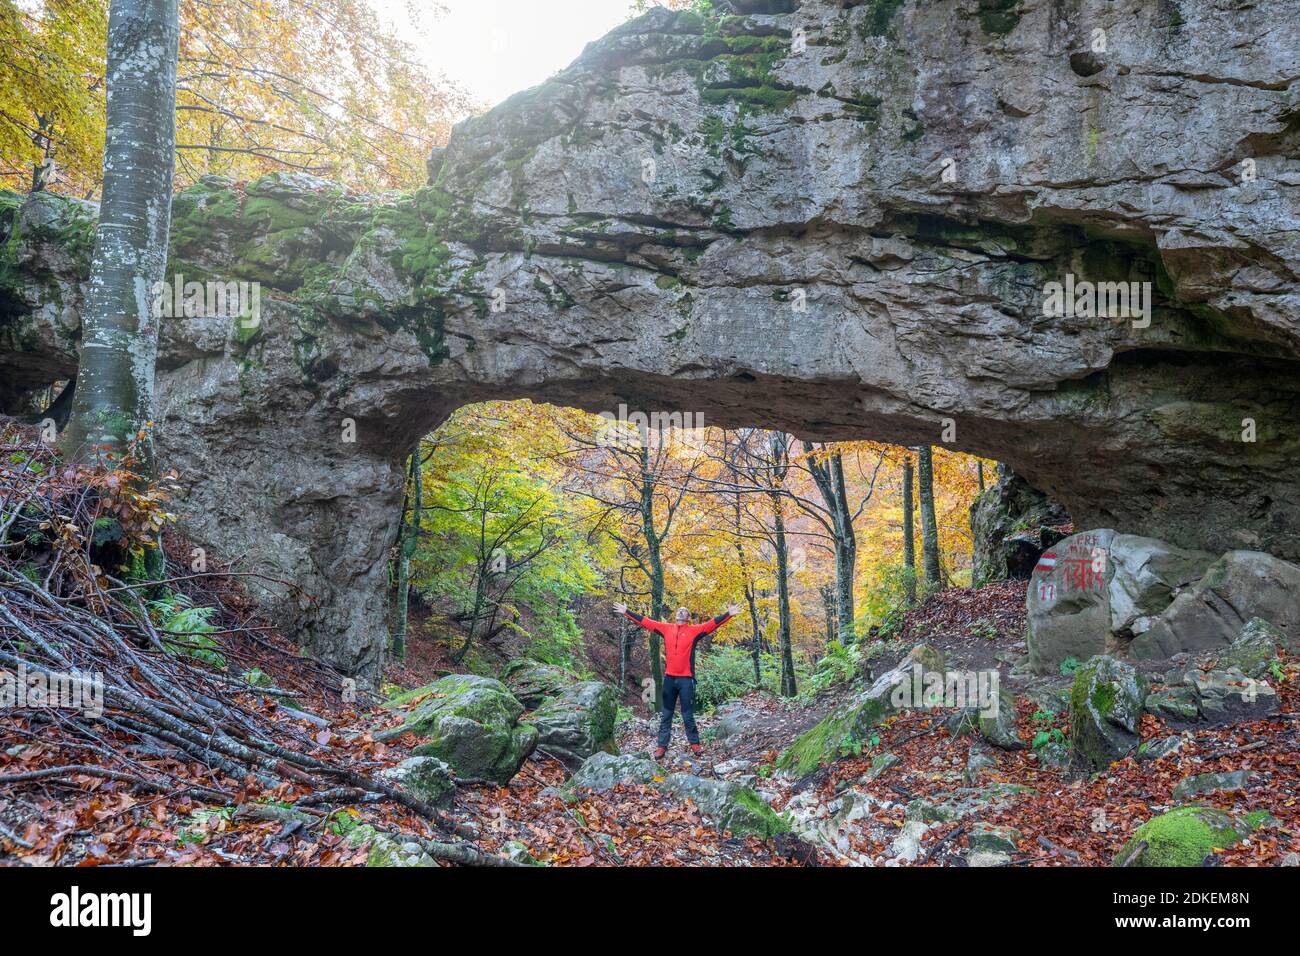 Natural rock bridge in the Val d'Arc forest, ancient border between the municipalities of Mel (today Borgo Valbelluna) and Miane (Treviso) established in 1838, historical place, venetian pre-alps, veneto, italy Stock Photo